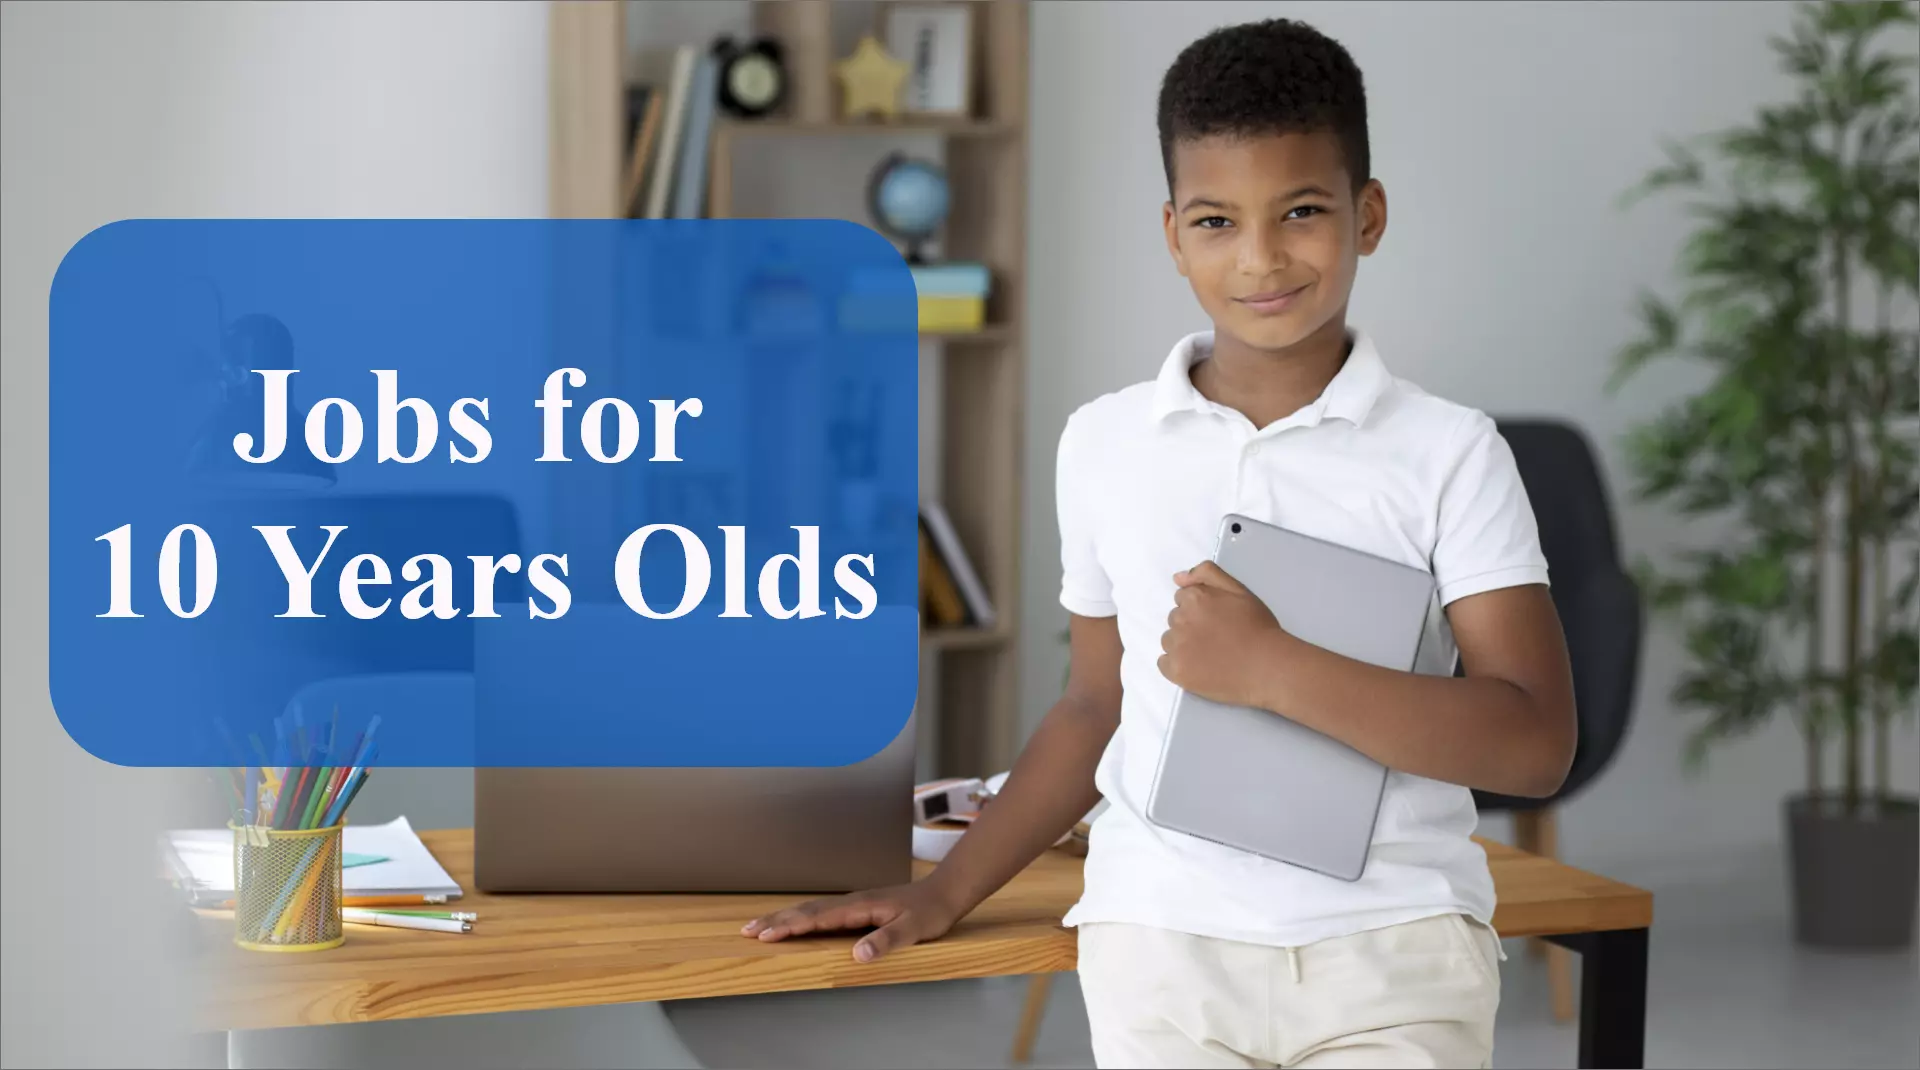 Explore jobs for 10 Year Olds